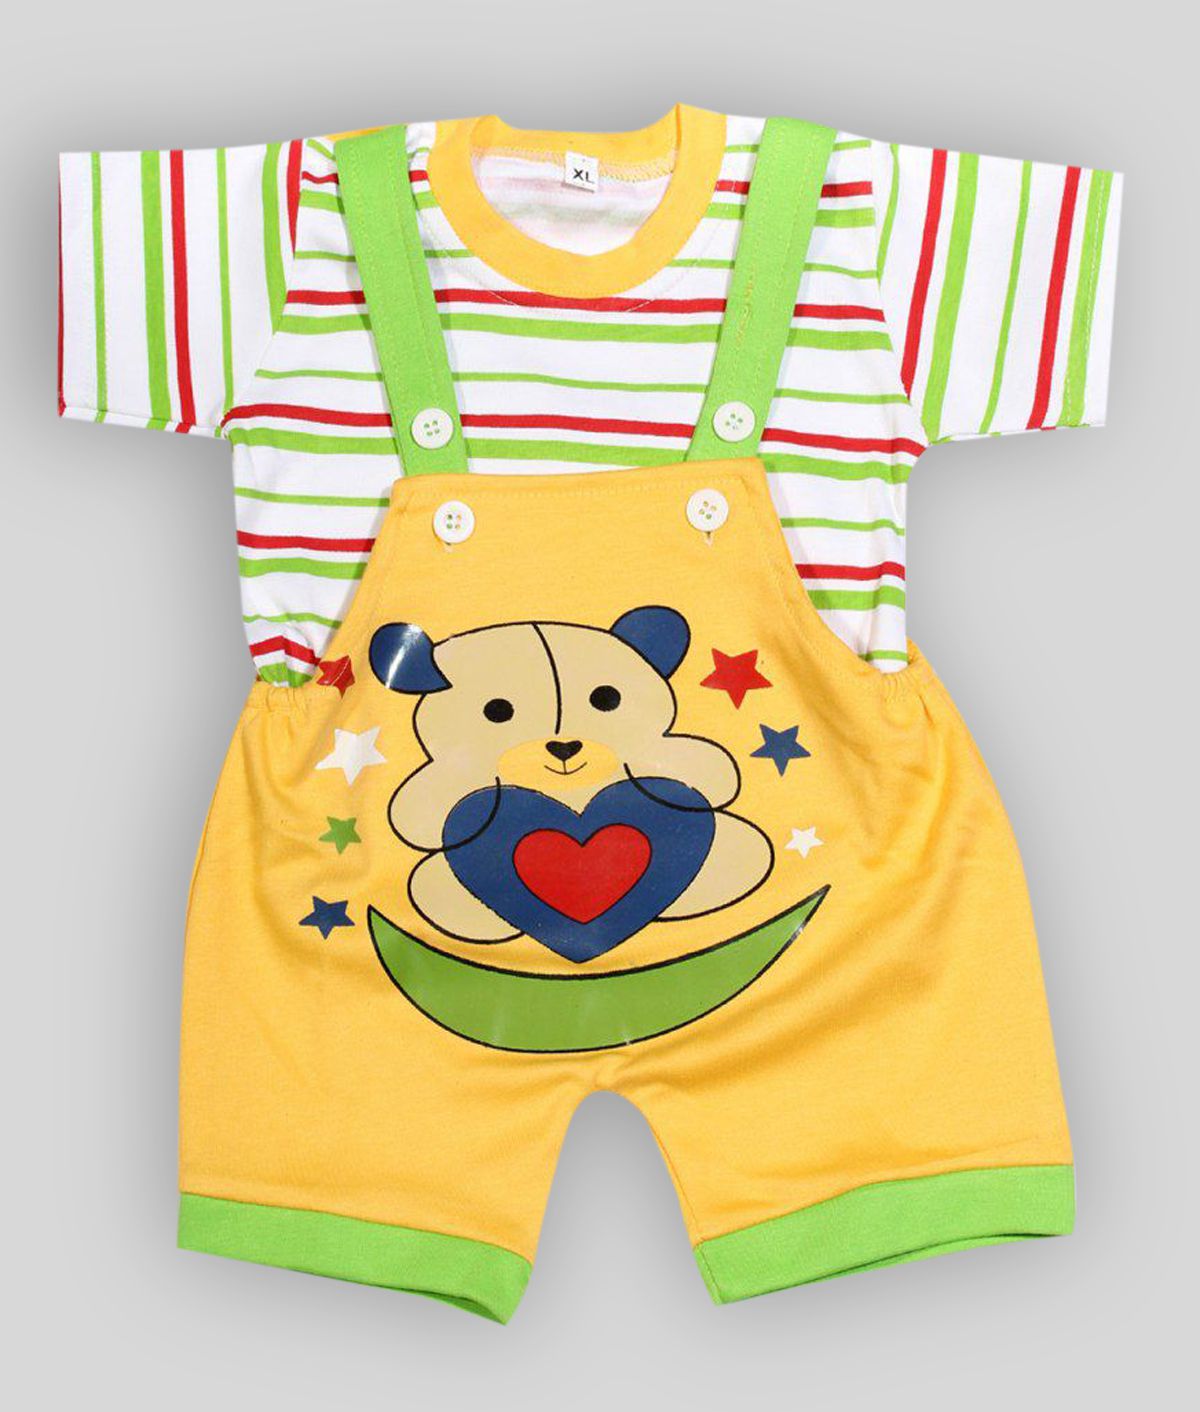     			Babeezworld - Multicolor Cotton Dungaree Sets For Baby Boy ( Pack of 1 )